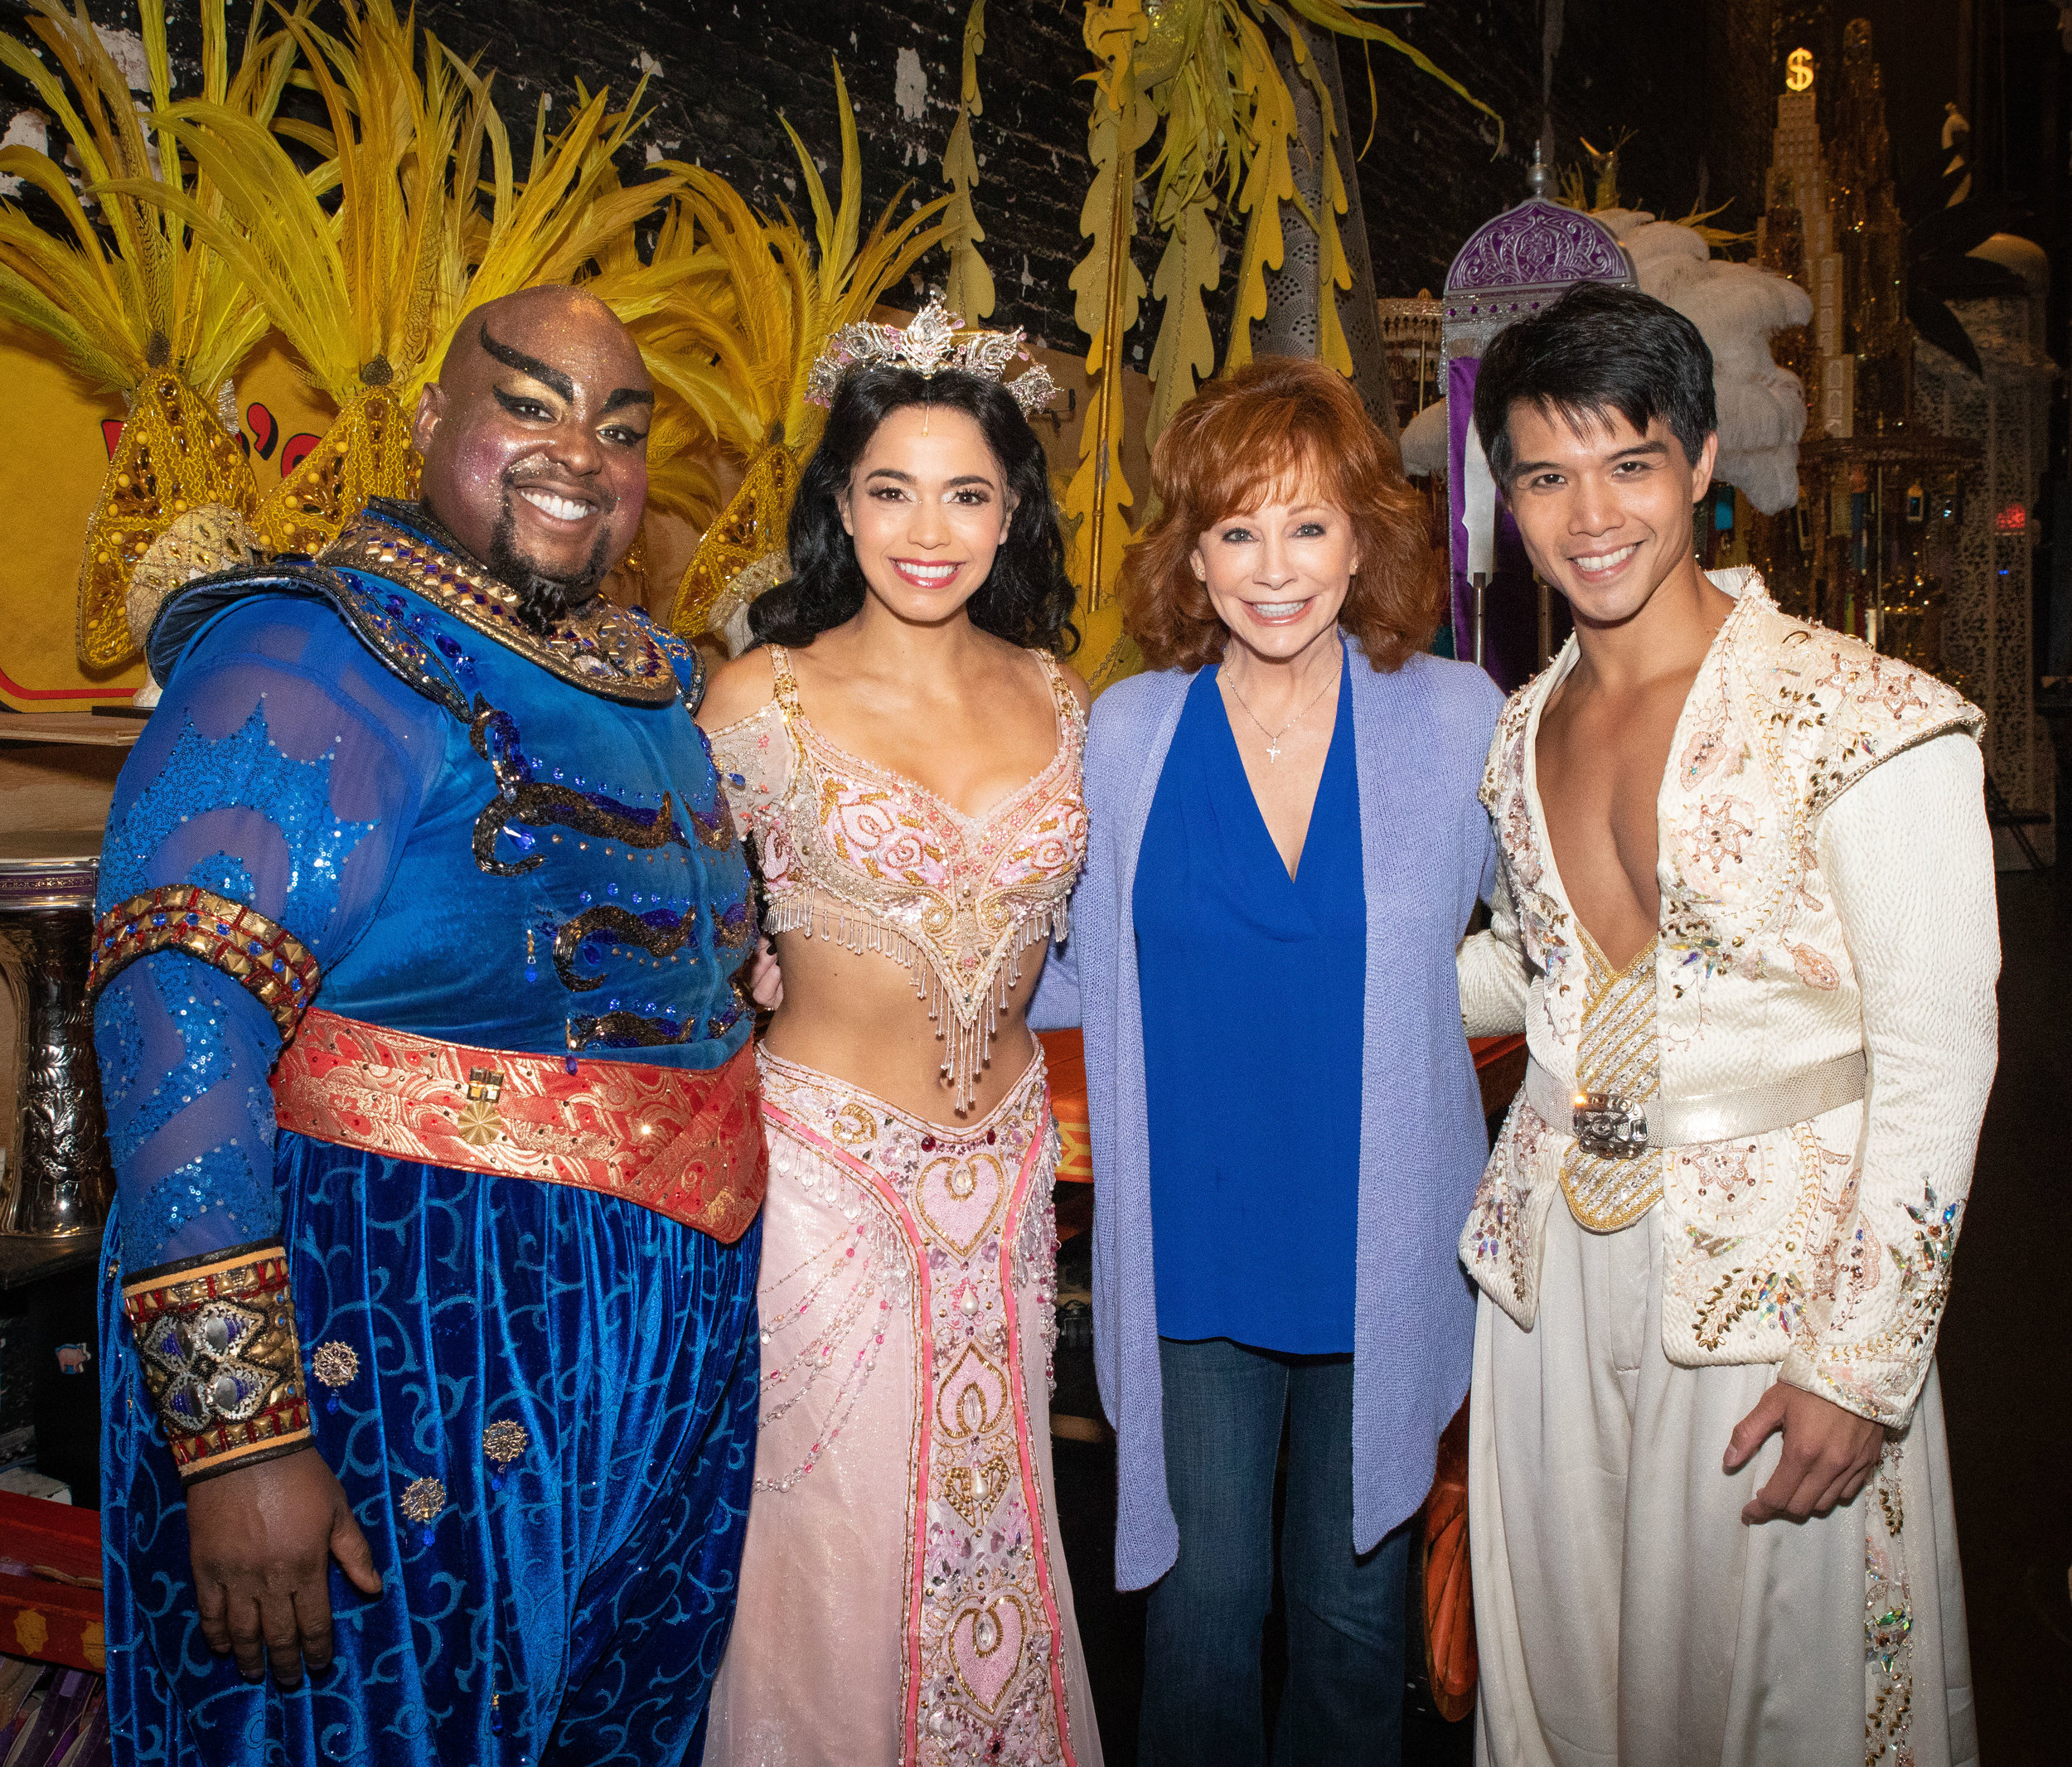  Major Attaway, Arielle Jacobs, Reba McEntire and Telly Leung Backstage at Broadway's Aladdin - Photo by Shay Frey Courtesy Disney Theatrical Productions 